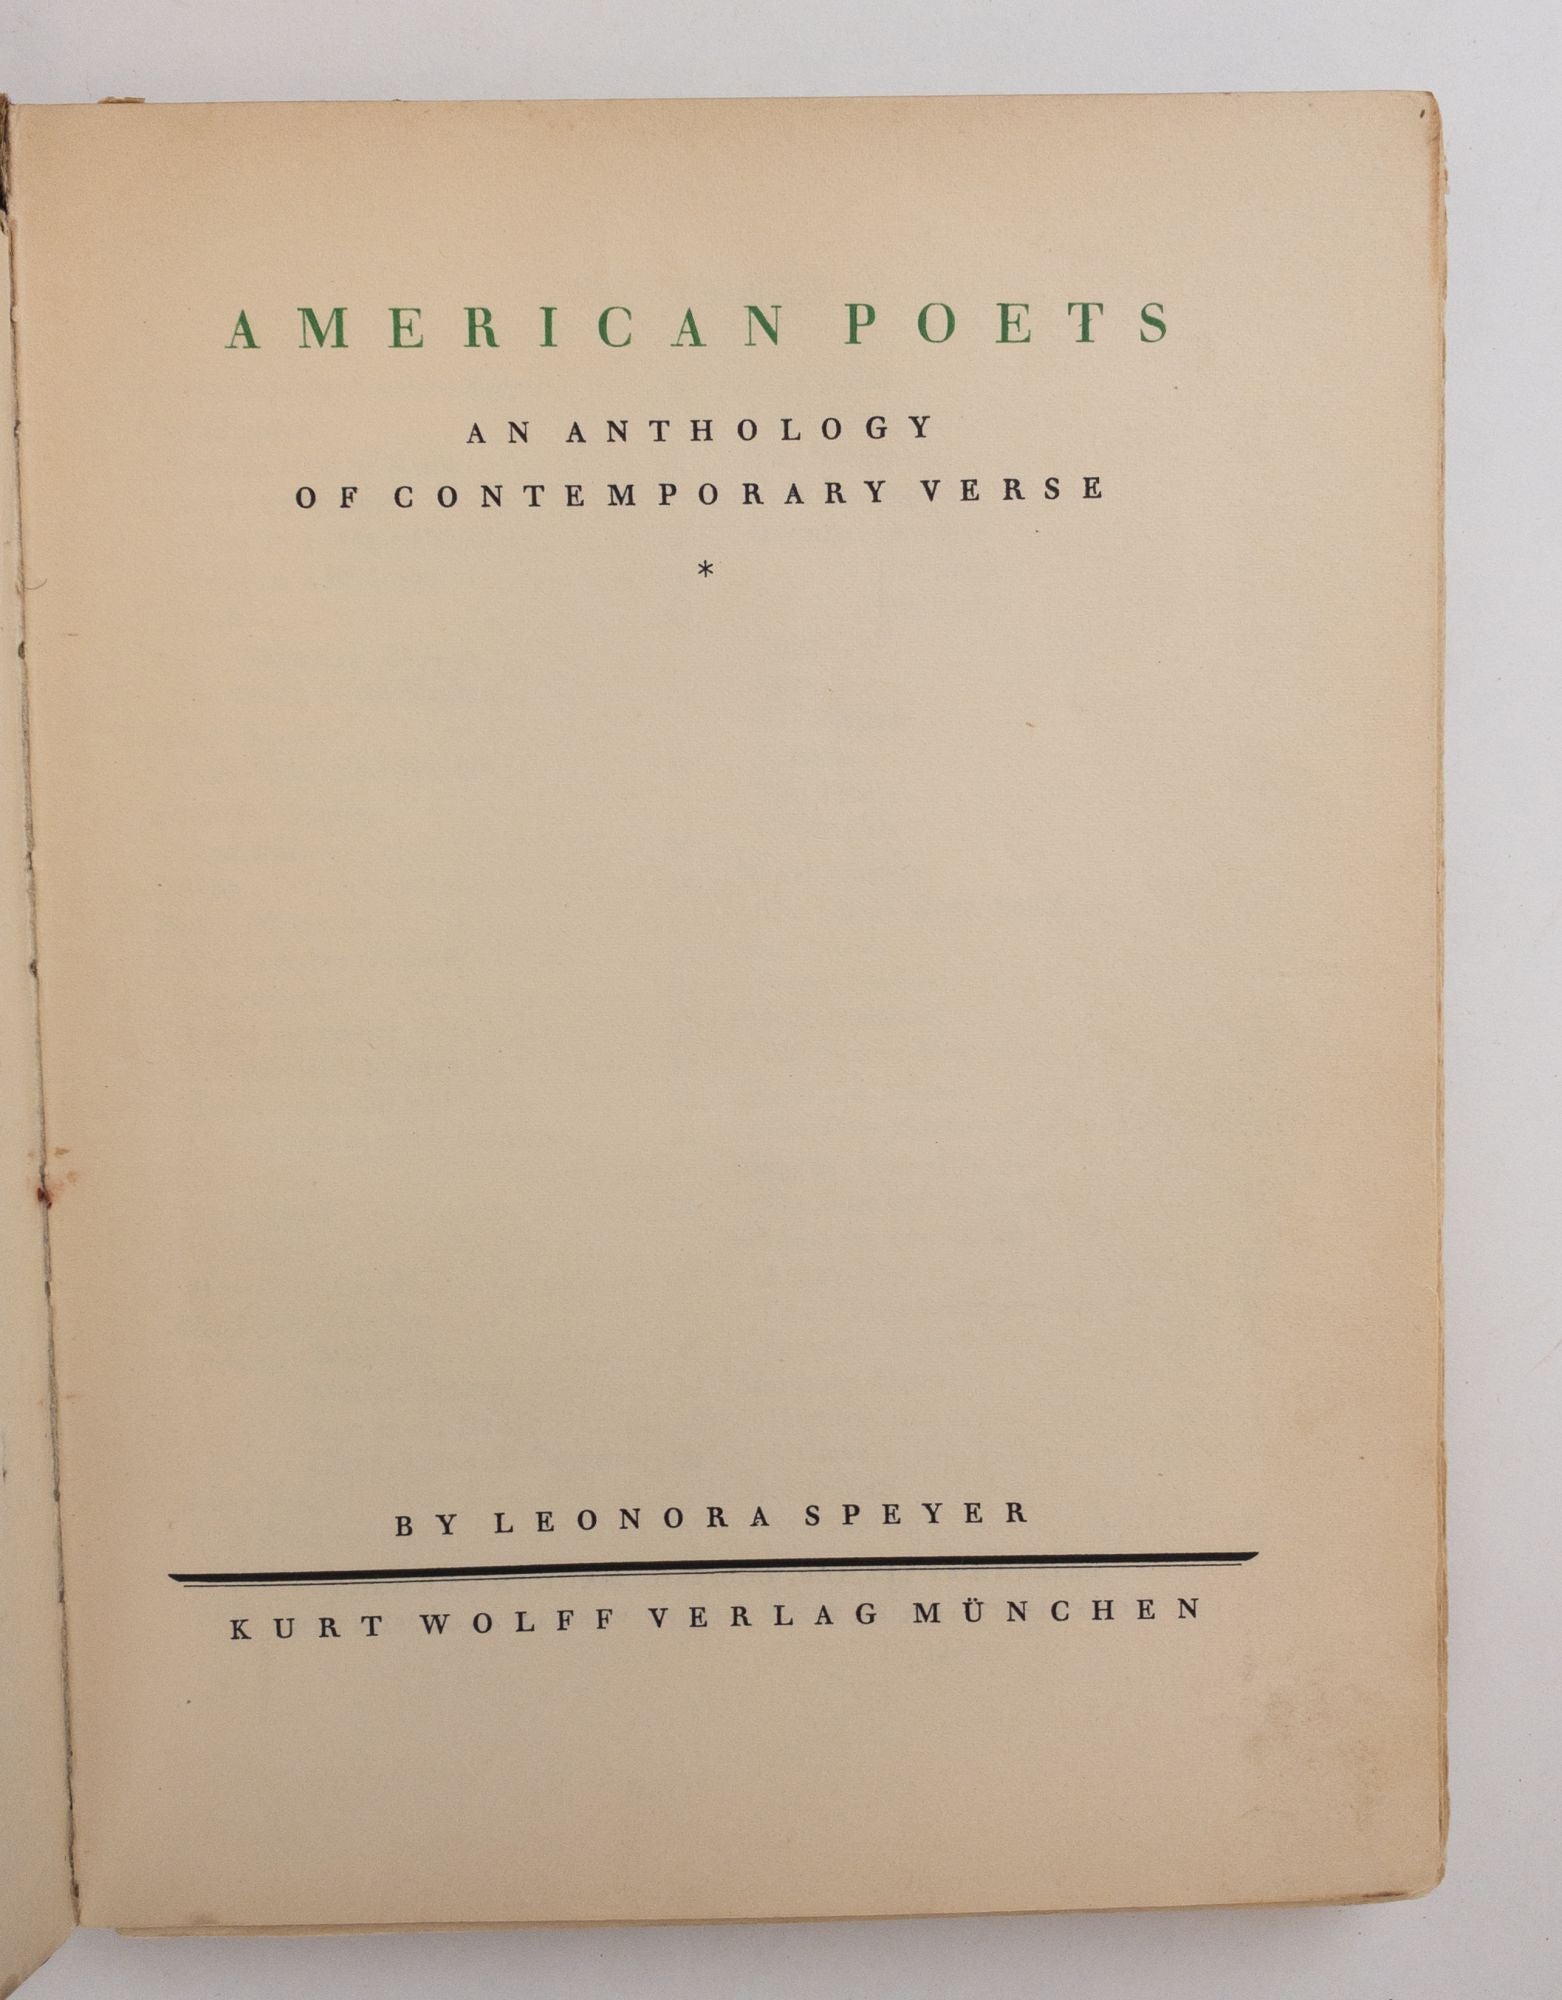 Product Image for AMERICAN POETS - AN ANTHOLOGY OF CONTEMPORARY VERSE [Leonora Speyer's Copy]